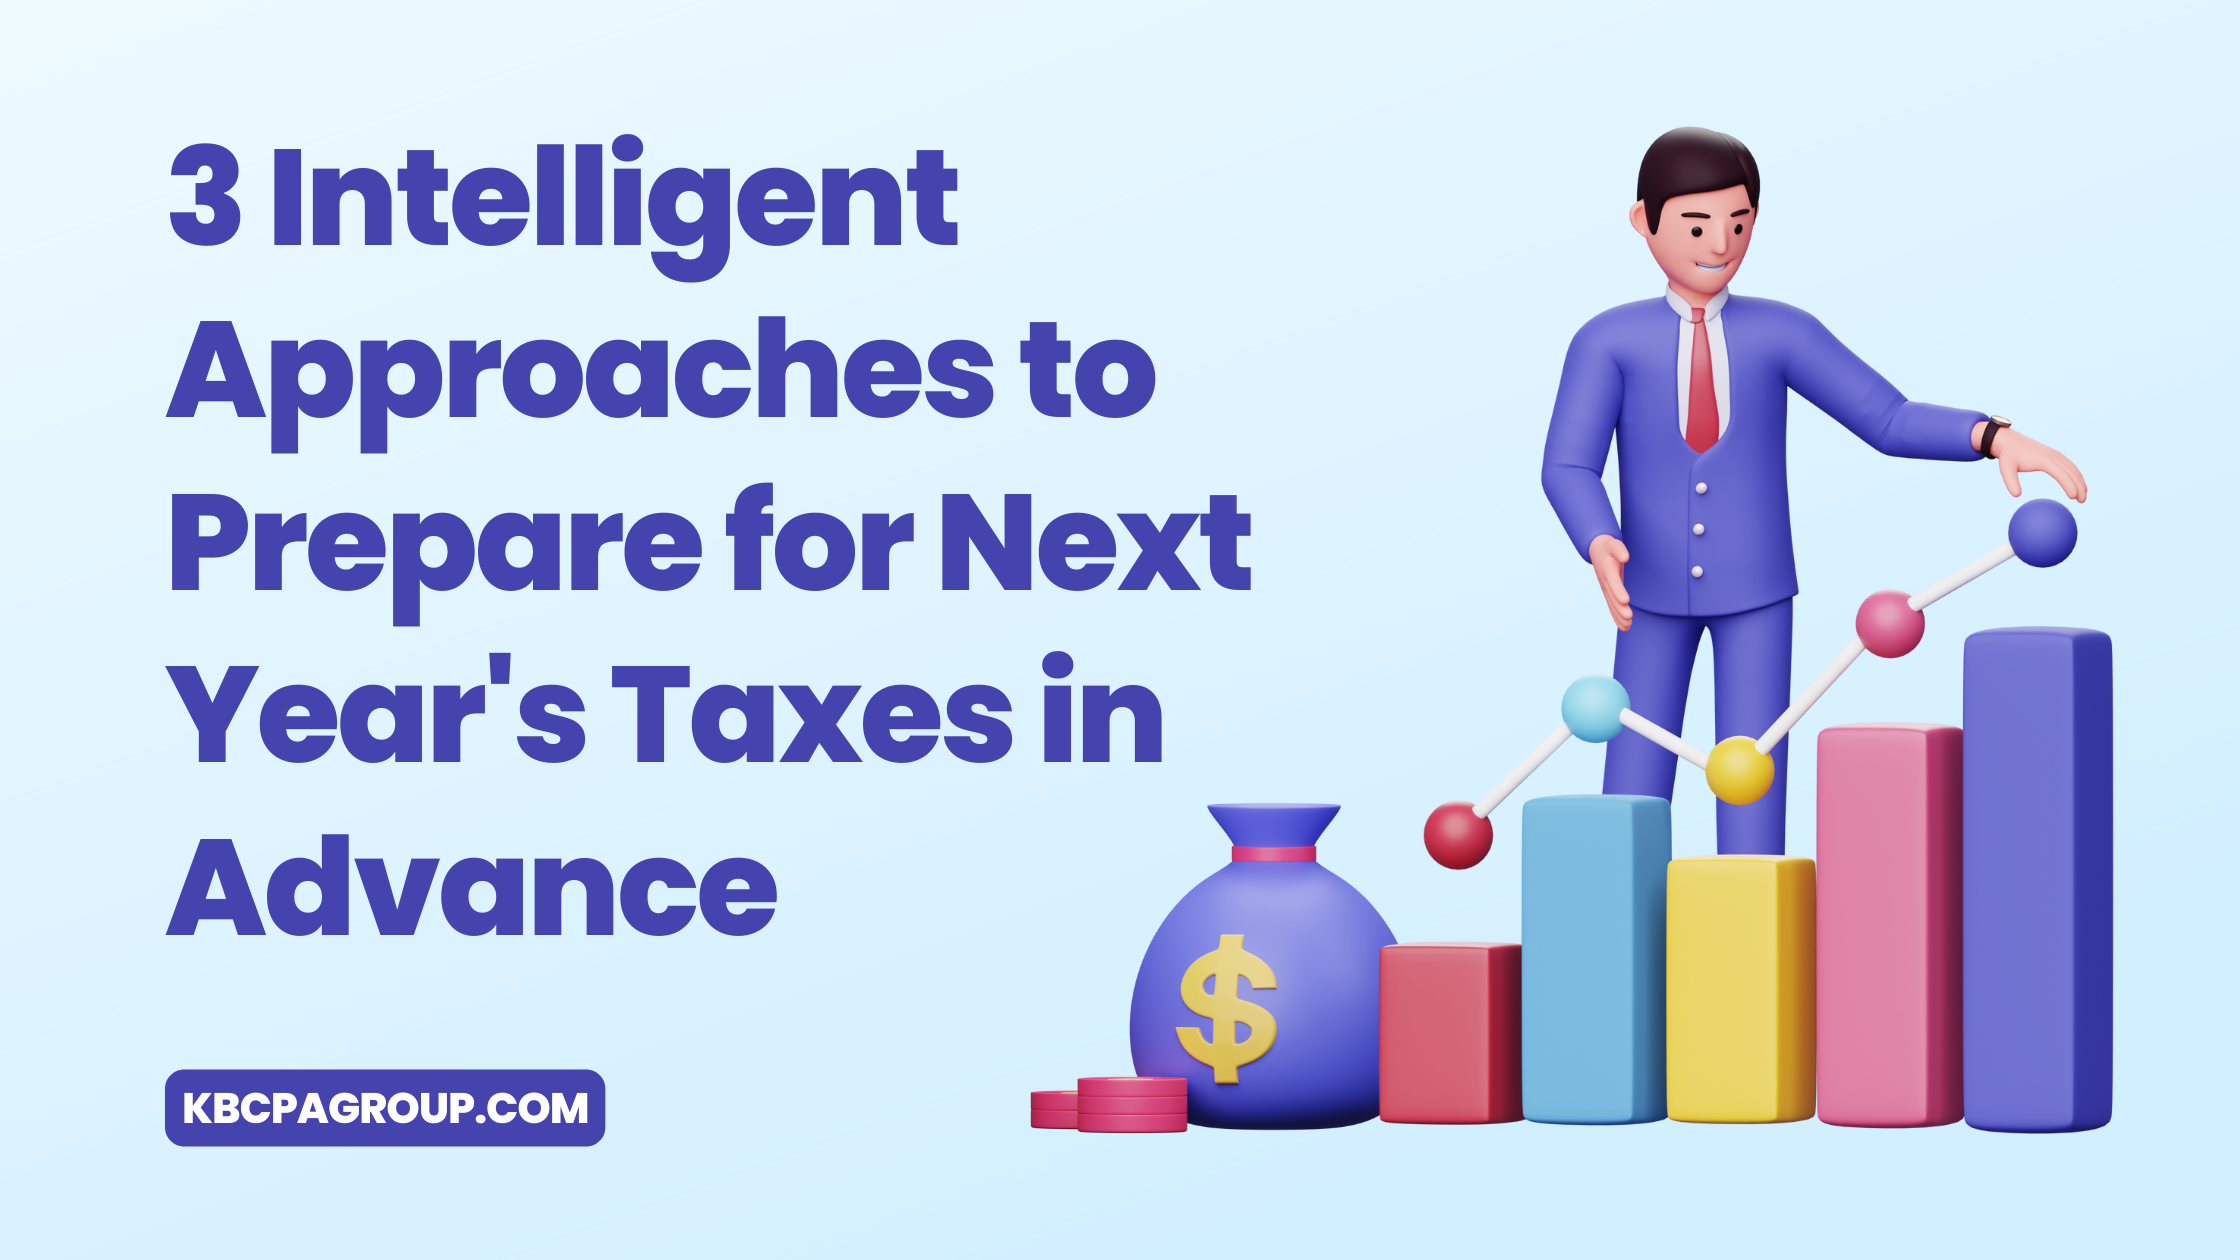 Three Intelligent Approaches to Prepare for Next Year's Taxes in Advance